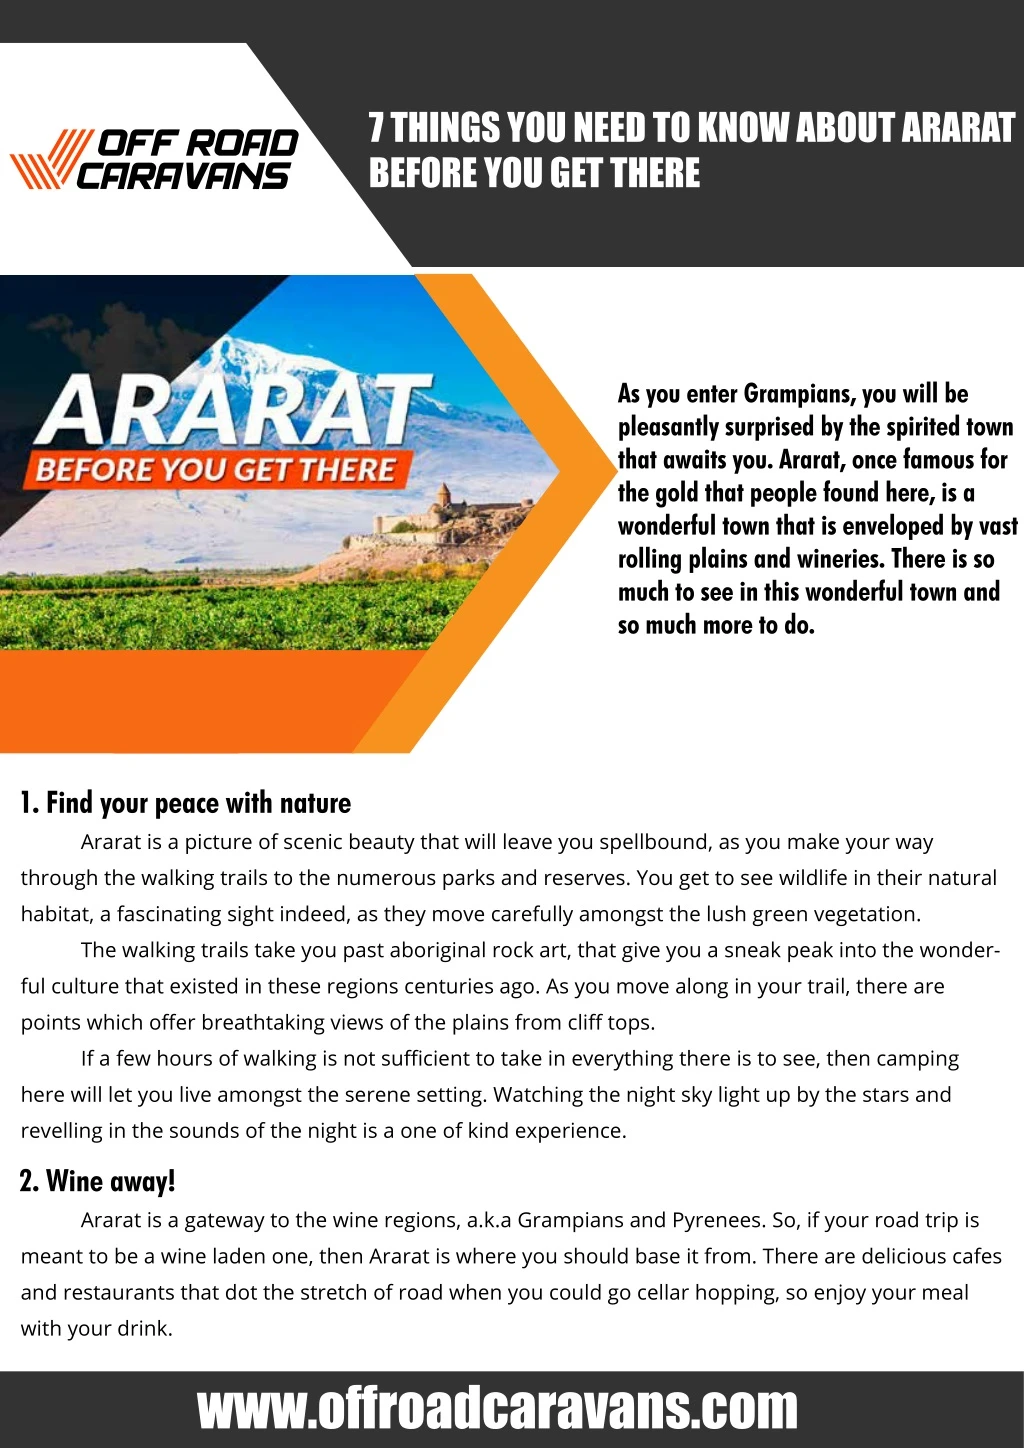 7 things you need to know about ararat before